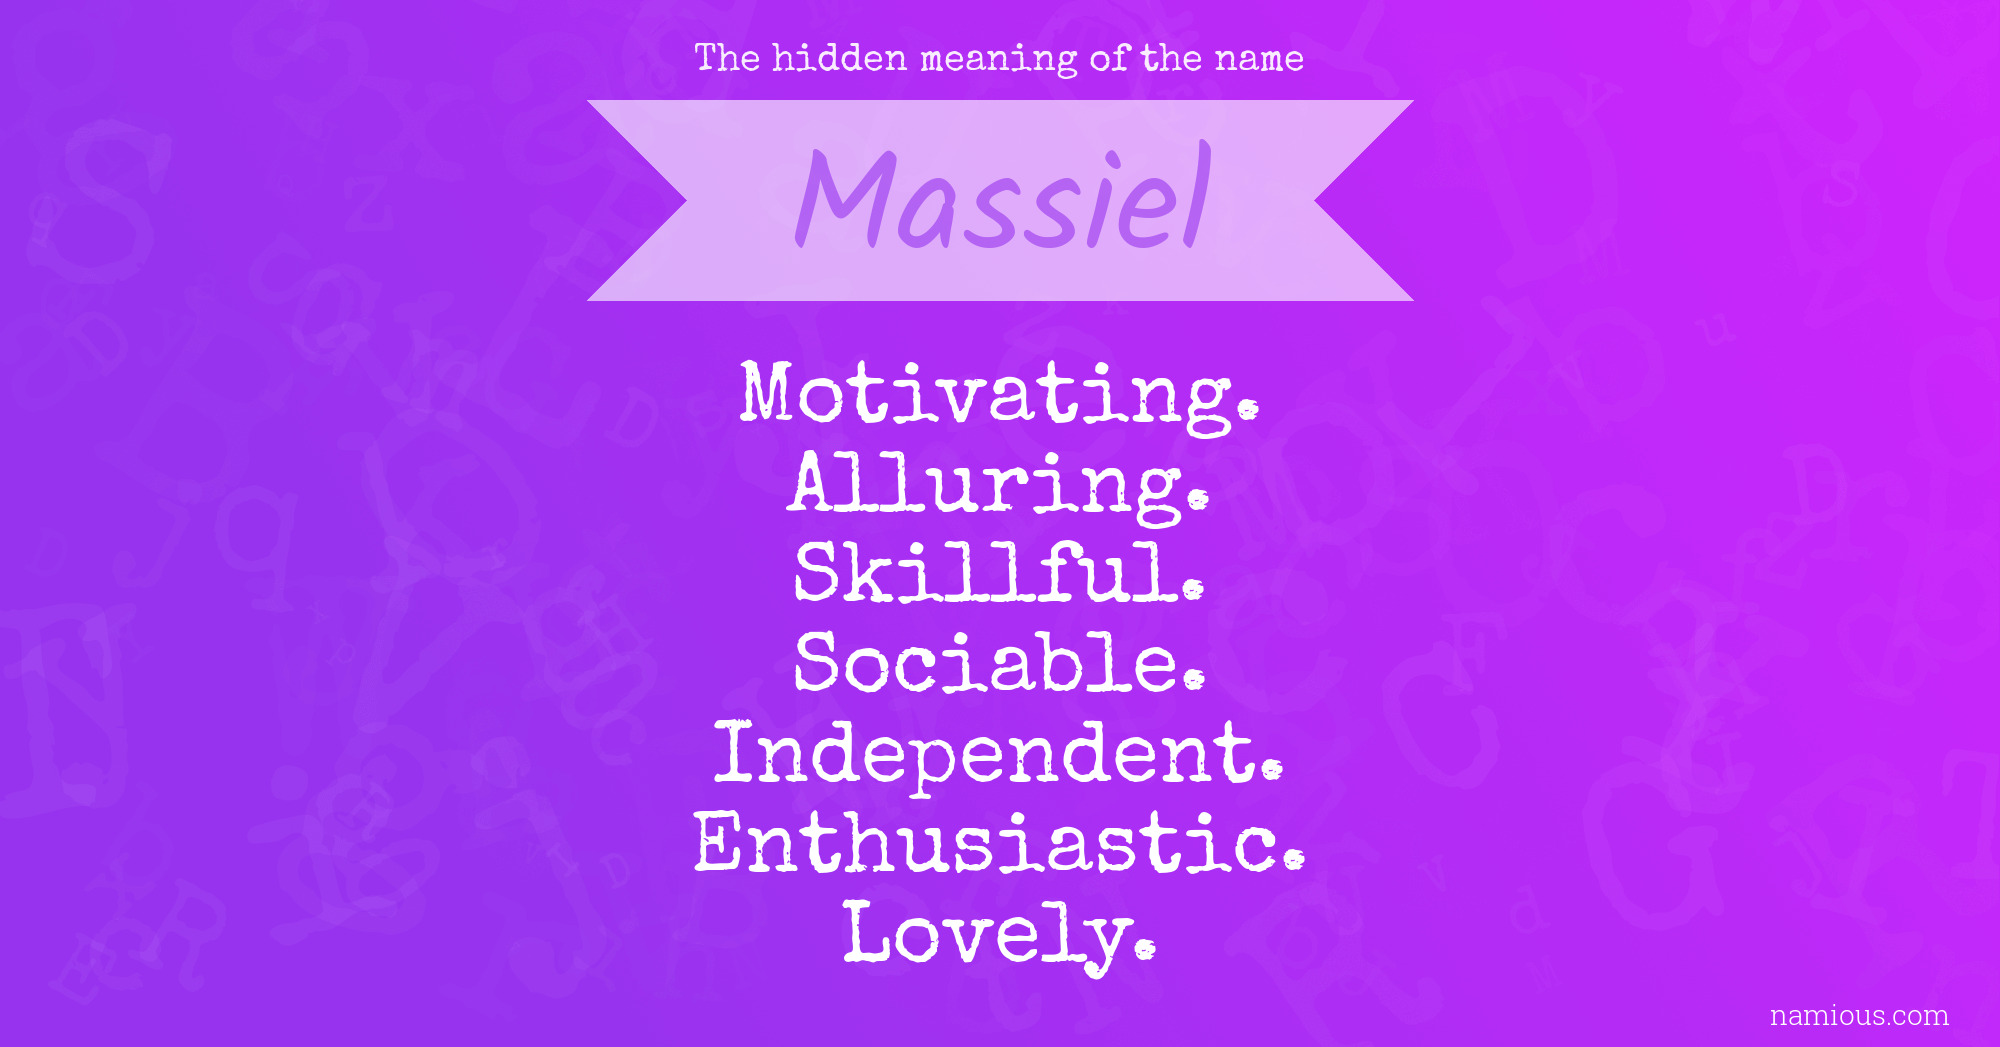 The hidden meaning of the name Massiel